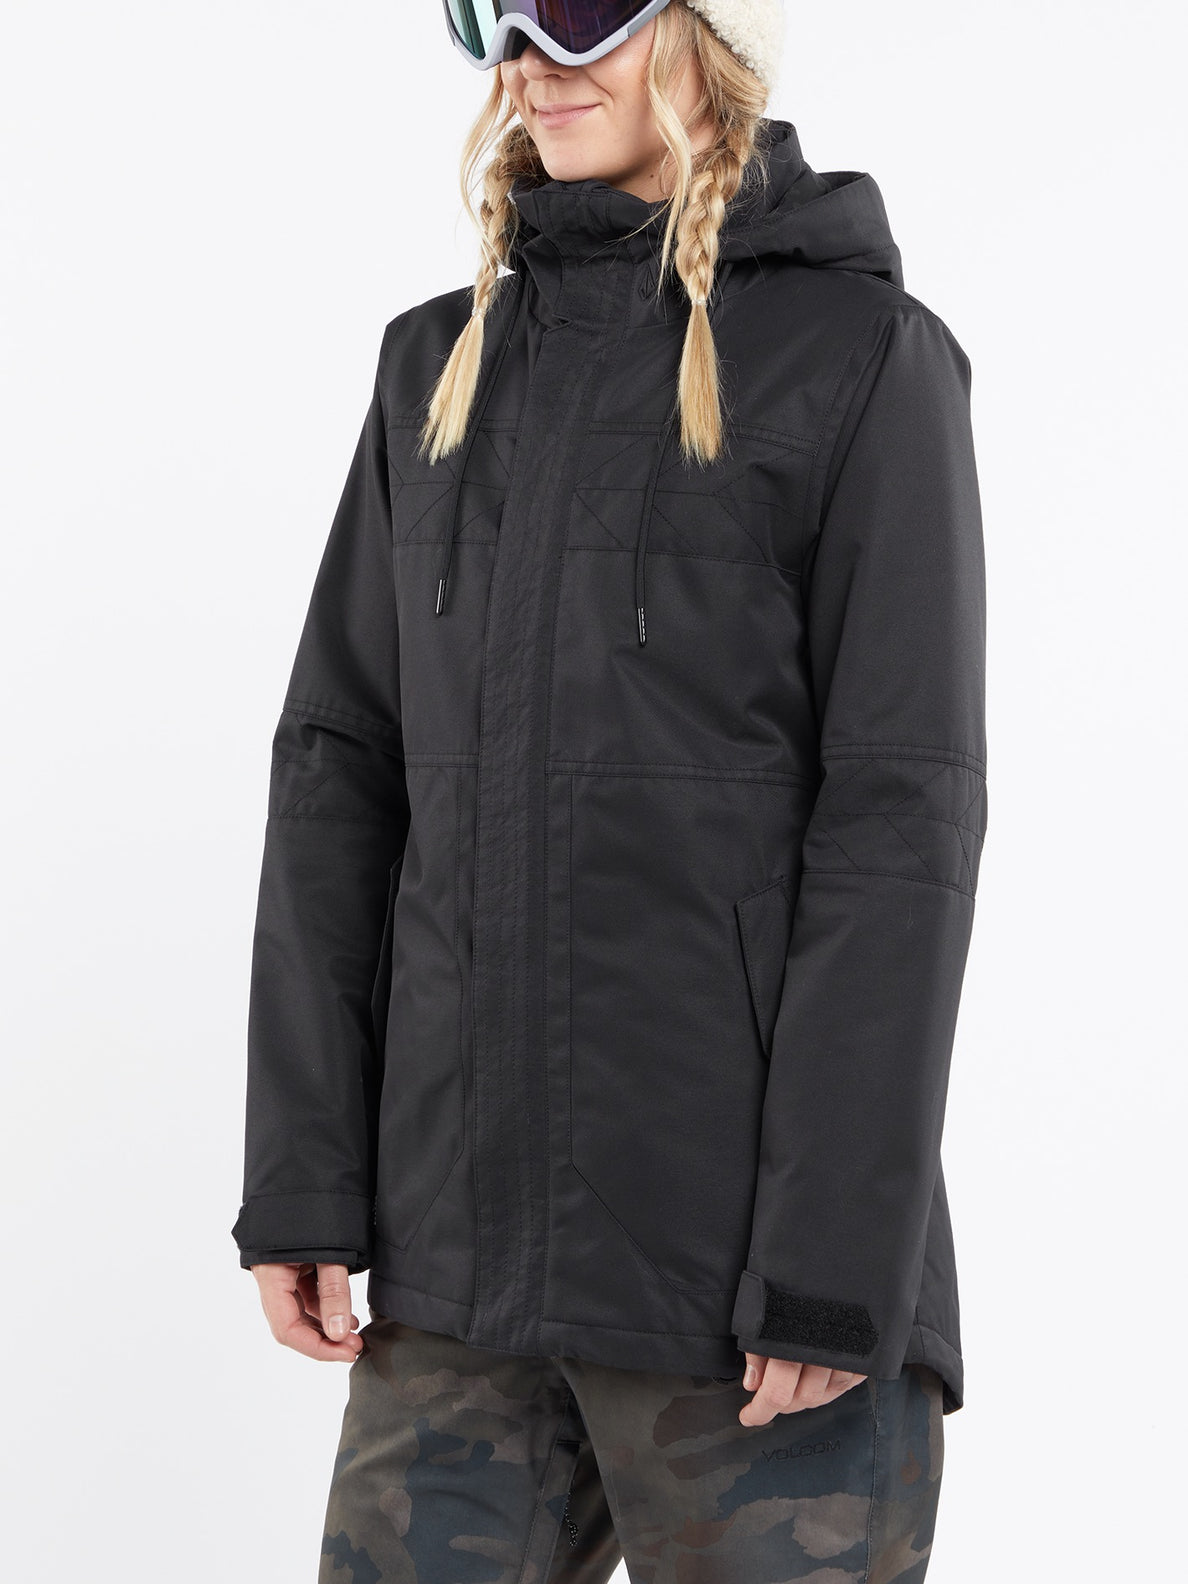 Womens Fawn Insulated Jacket - Black (H0452410_BLK) [37]